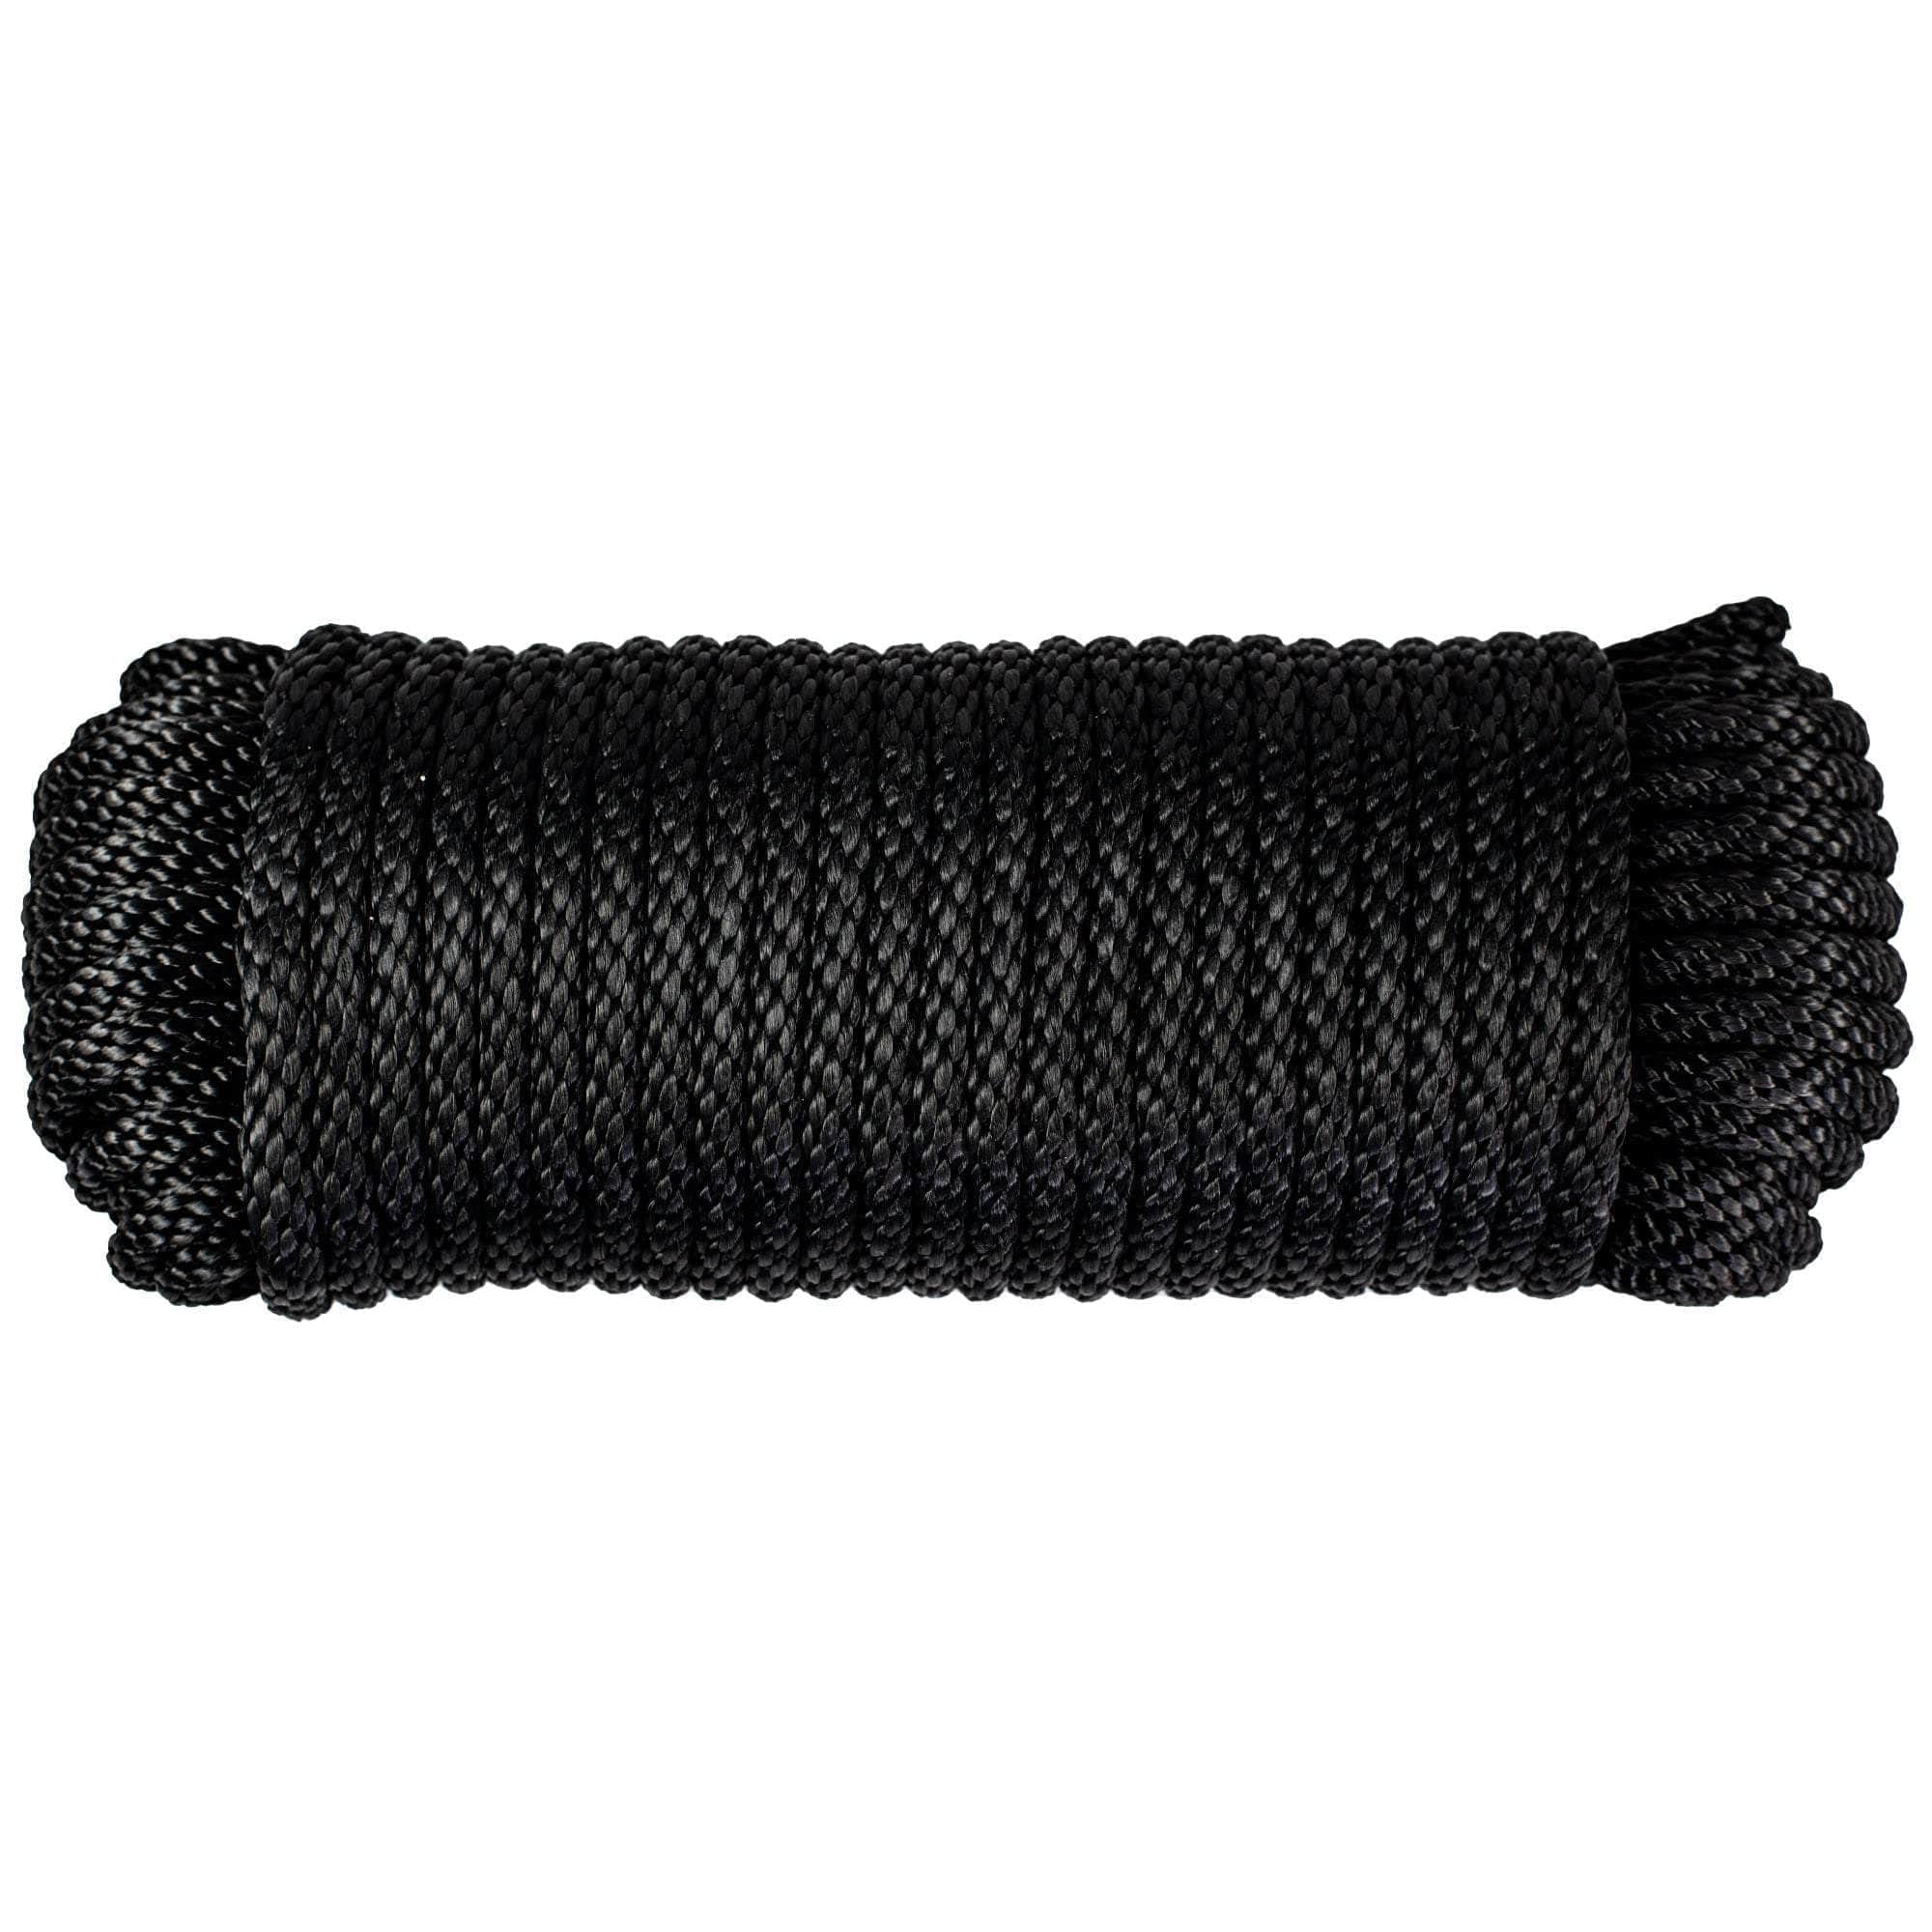 Sgt Knots SgT KNOTS Solid Braid Nylon Utility Rope - Multipurpose Smooth  Nylon Braided Utility cord Line - for Anchors, crafts, Towing (38